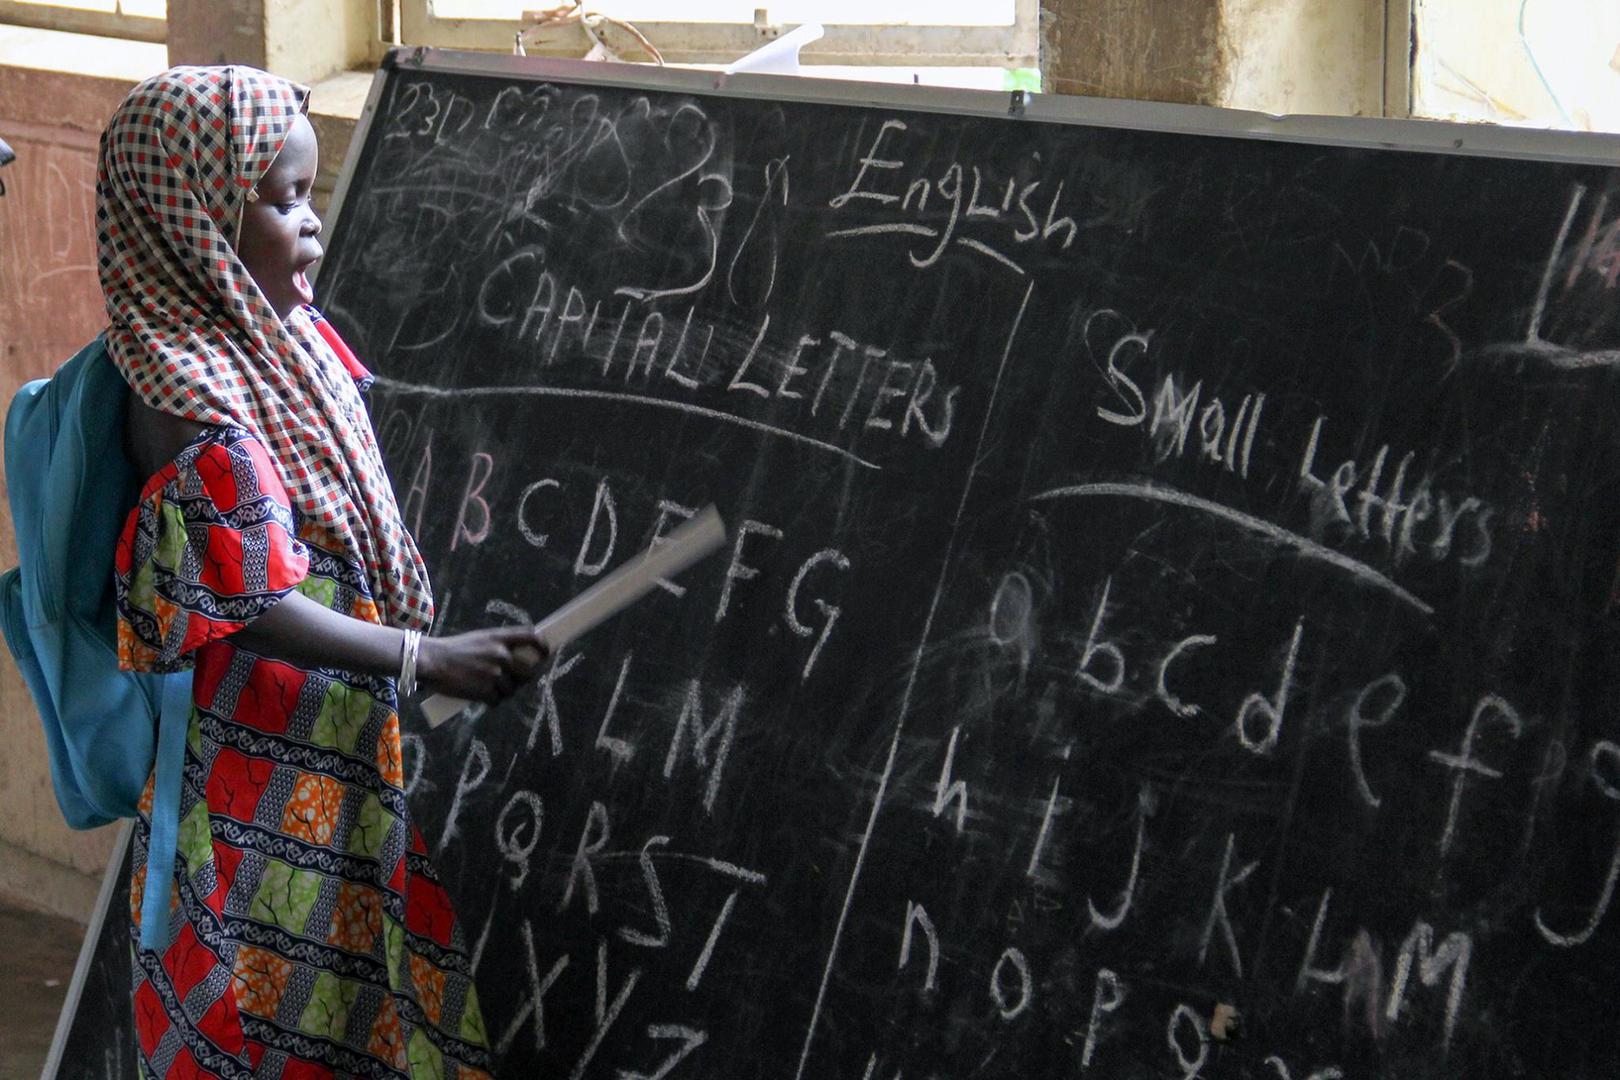 An eager student leads her class in learning the alphabet in September 2015 at a displacement camp housed at a school in Maiduguri, Borno state. © 2015 Bede Sheppard, Human Rights Watch